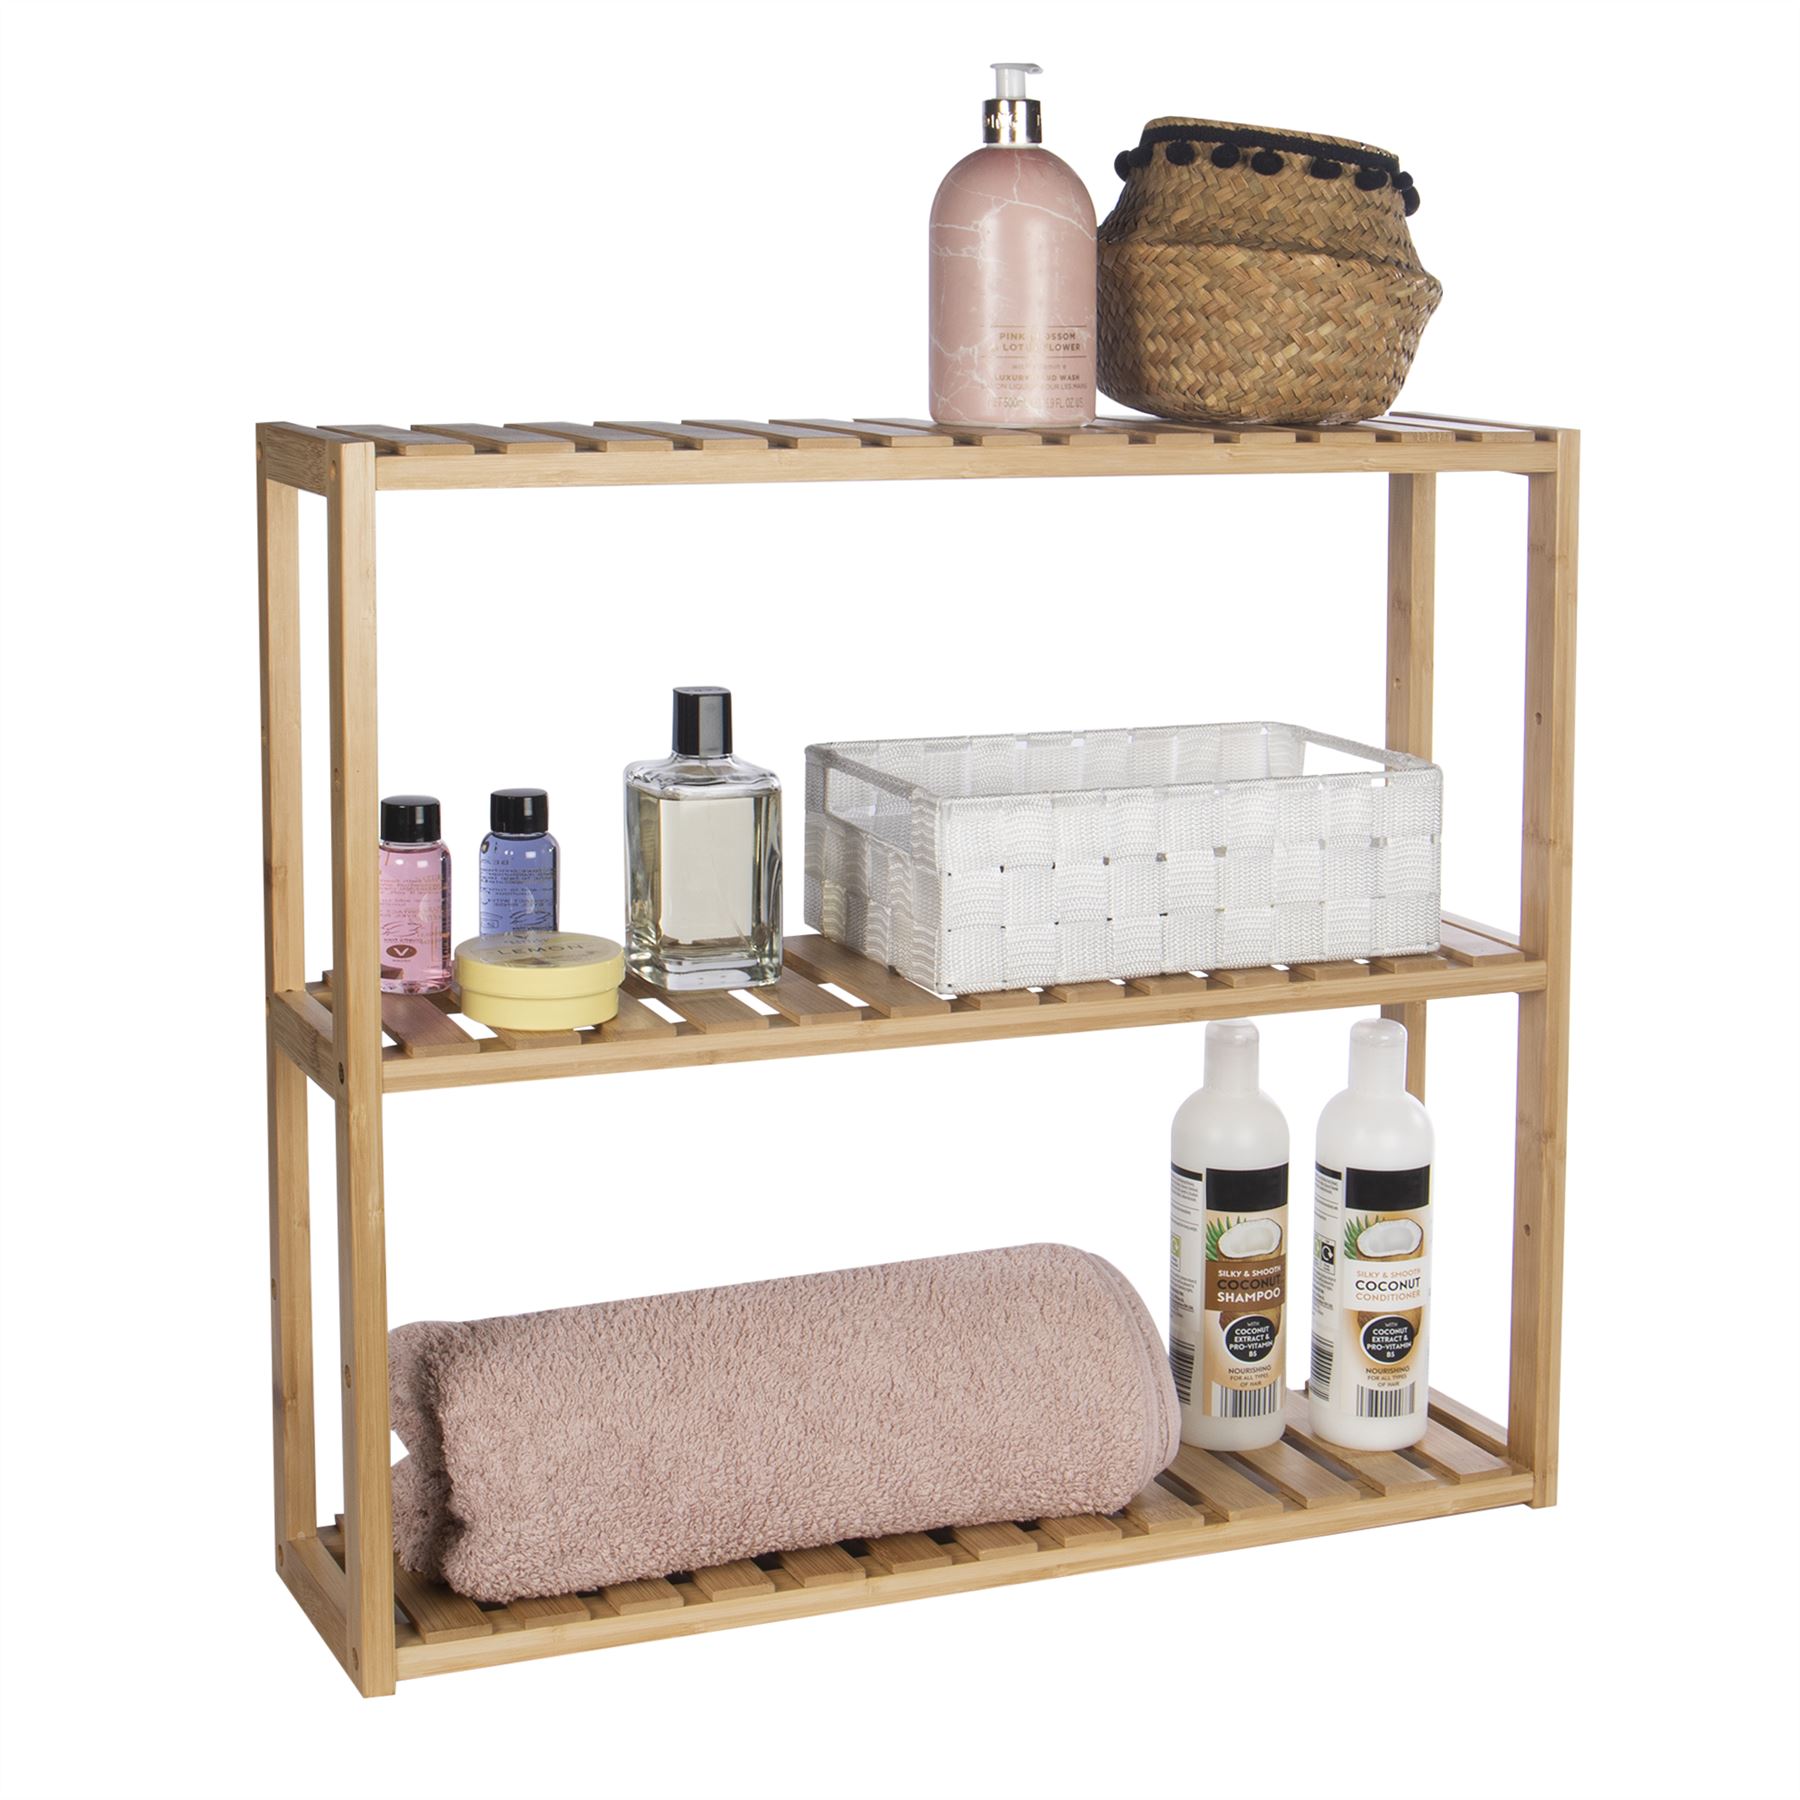 3 Tier Bamboo Shelves - Natural | M&W